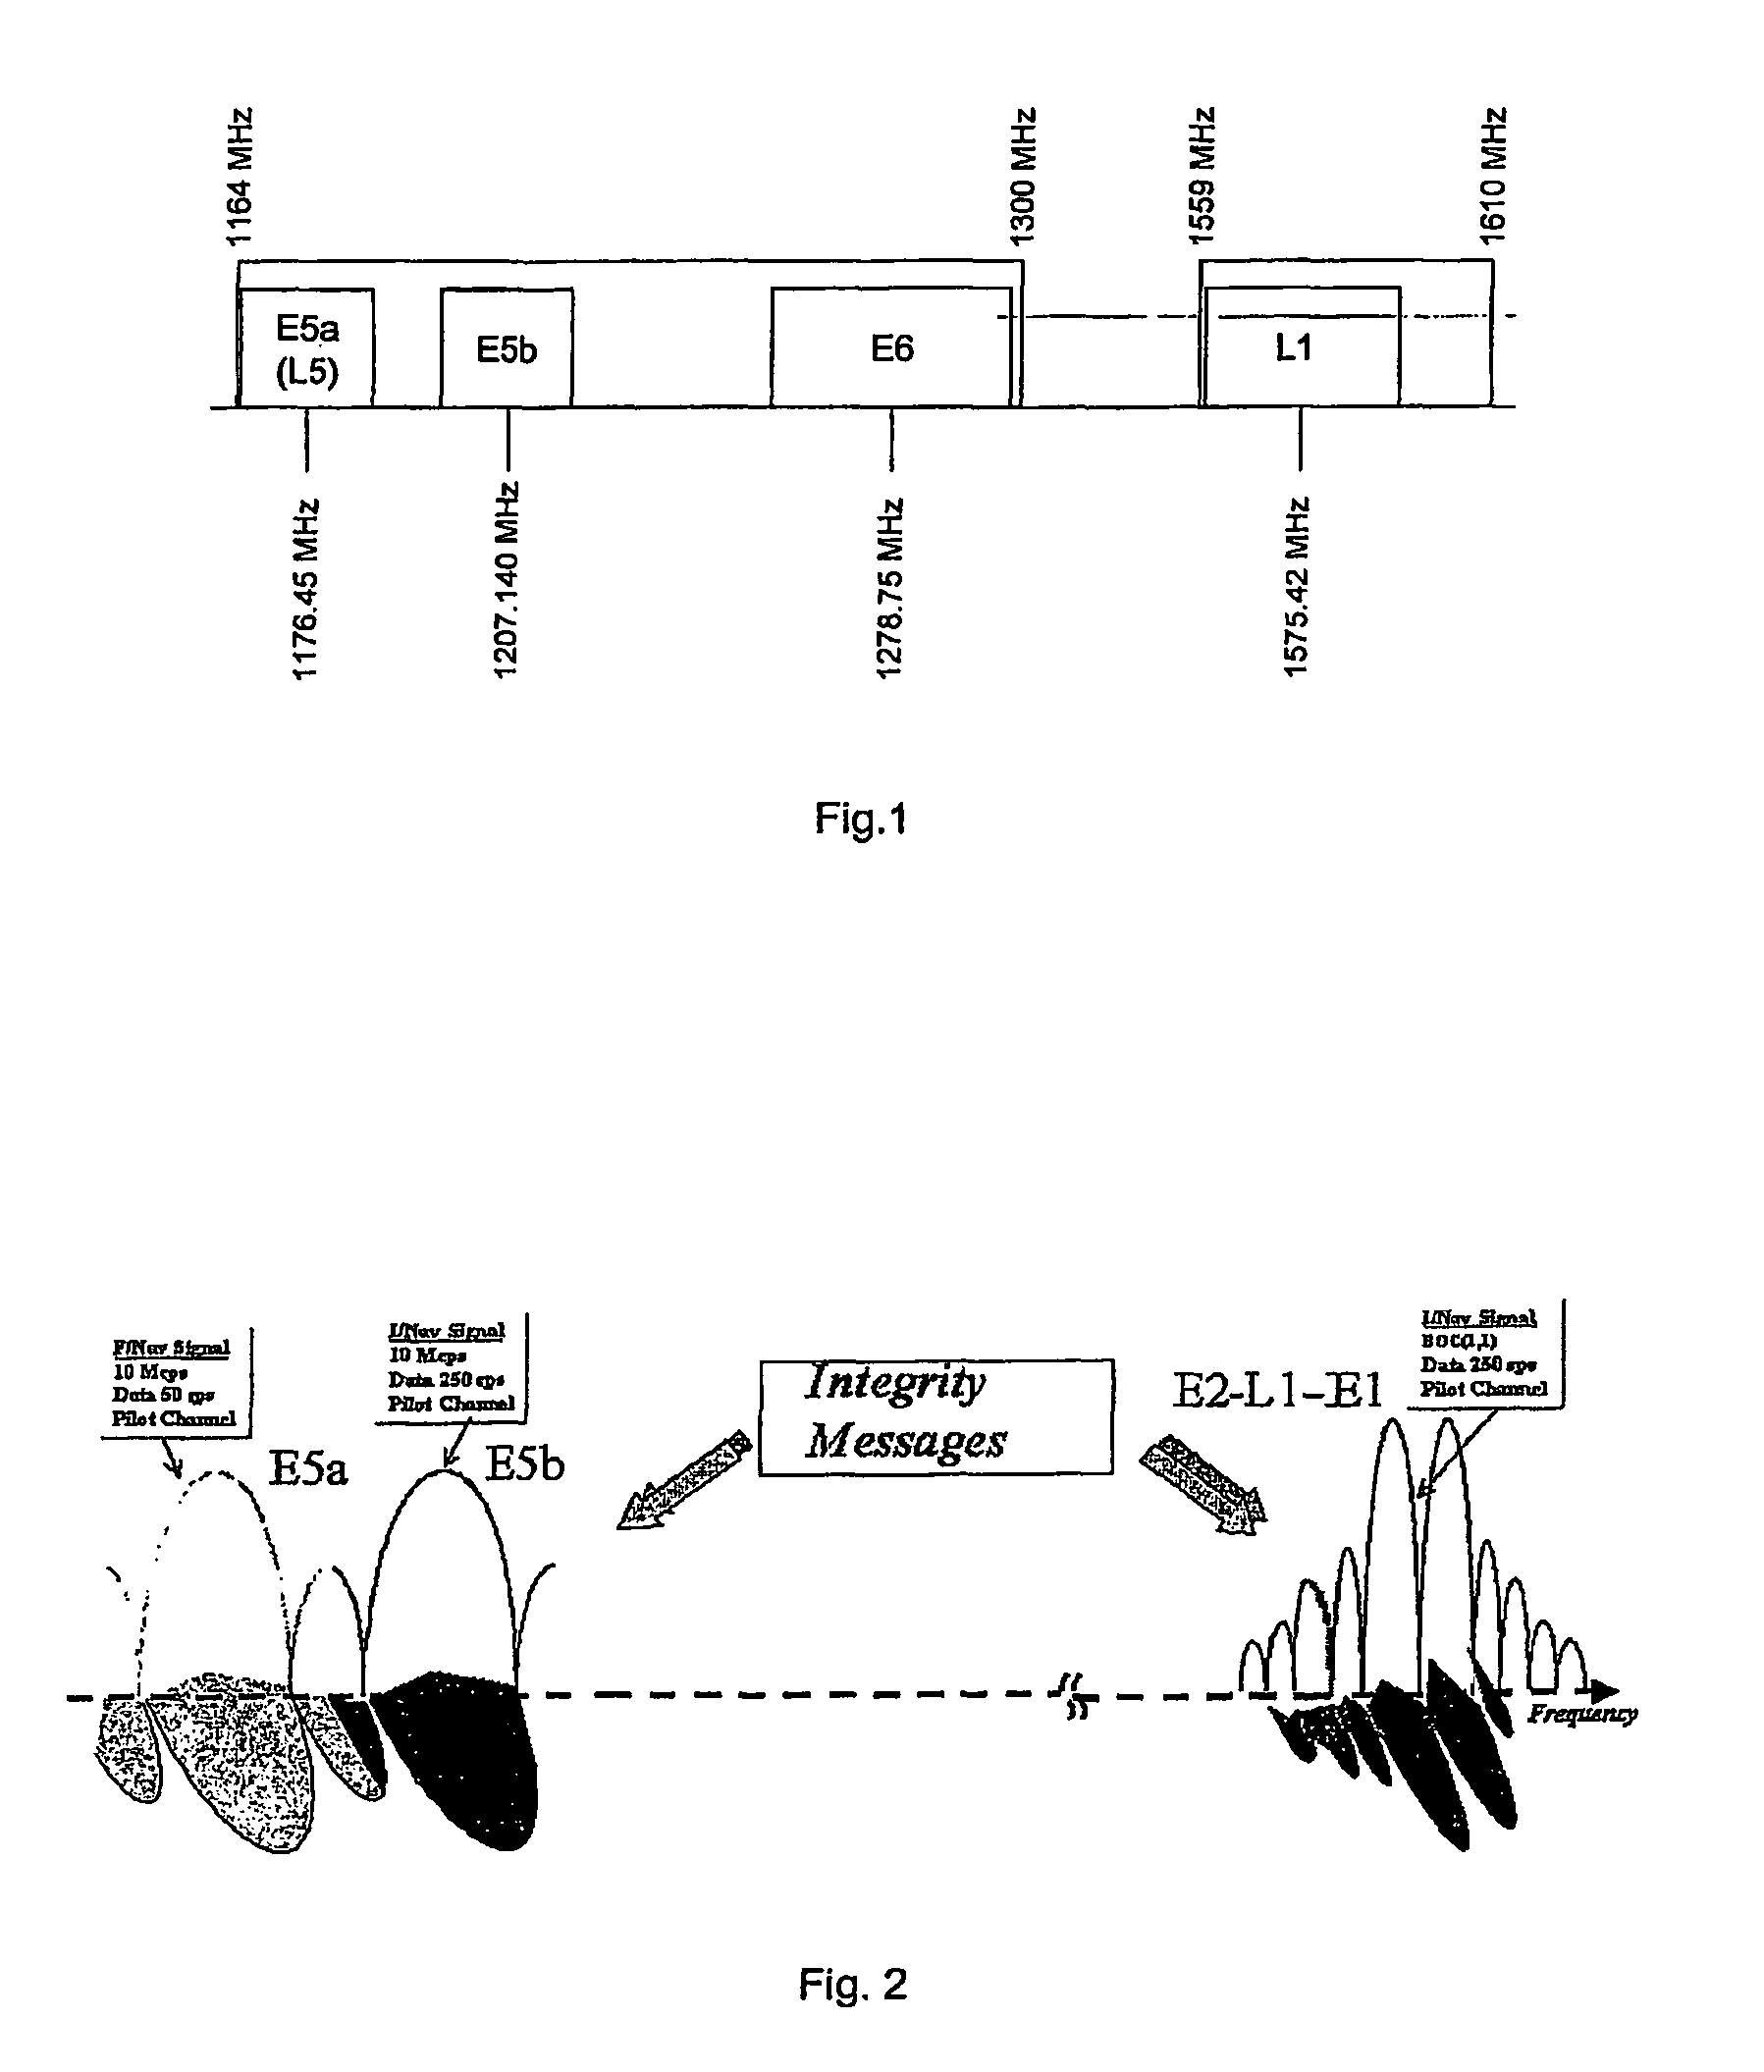 Method and apparatus for providing integrity information for users of a global navigation system